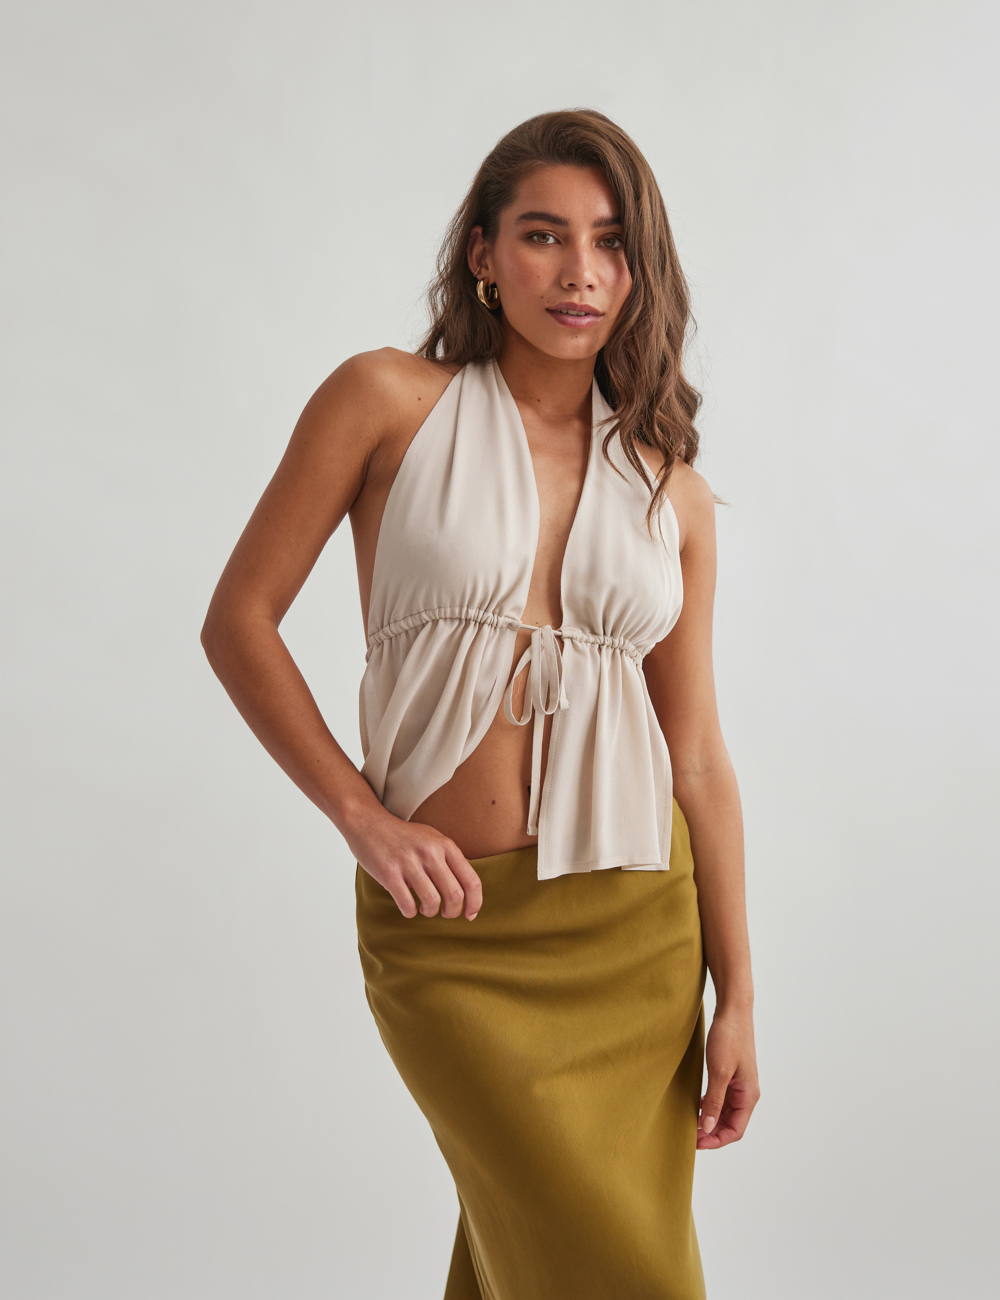 Hannie Release Halter Top - Something New Marketing DBA LouLou's